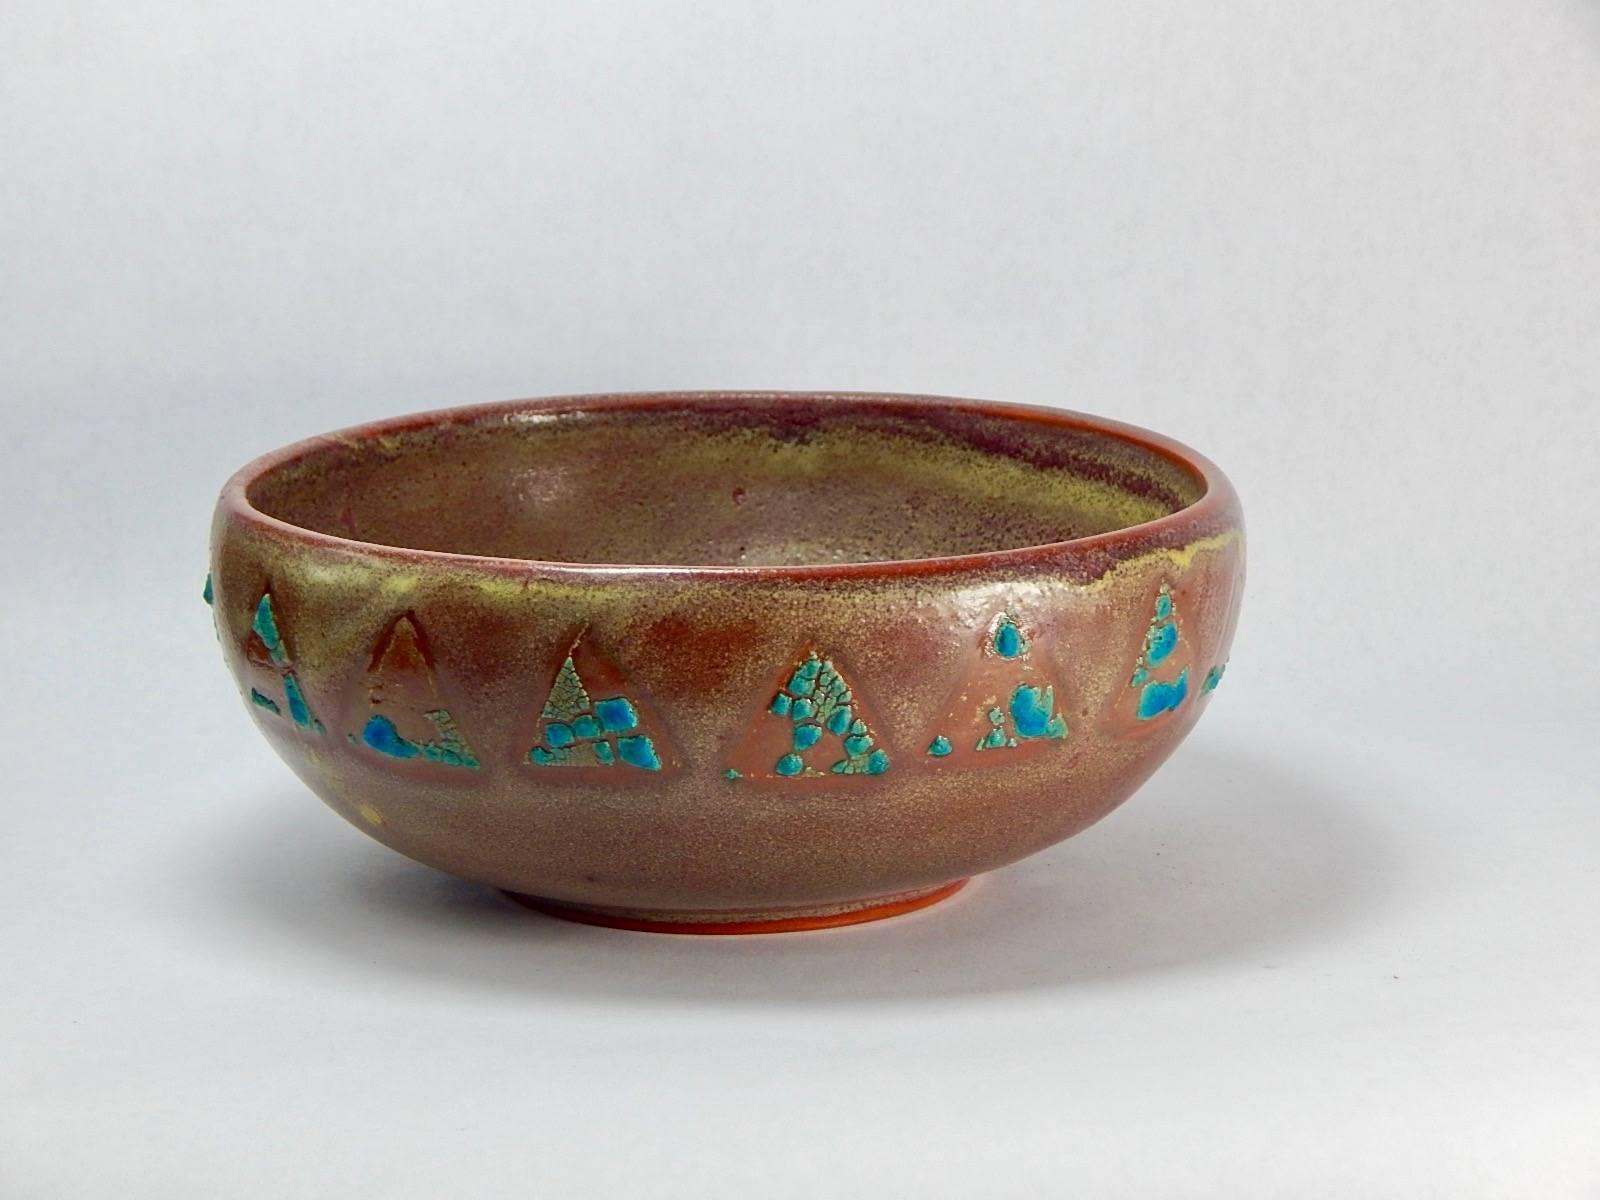 Relicware wheel thrown earthenware bowl by Andrew Wilder # 87. In terra cotta with dark red and mustard yellow glaze and white lichen overglaze . We can produce commissions to order in this series. Contact us for more information. Made by hand in